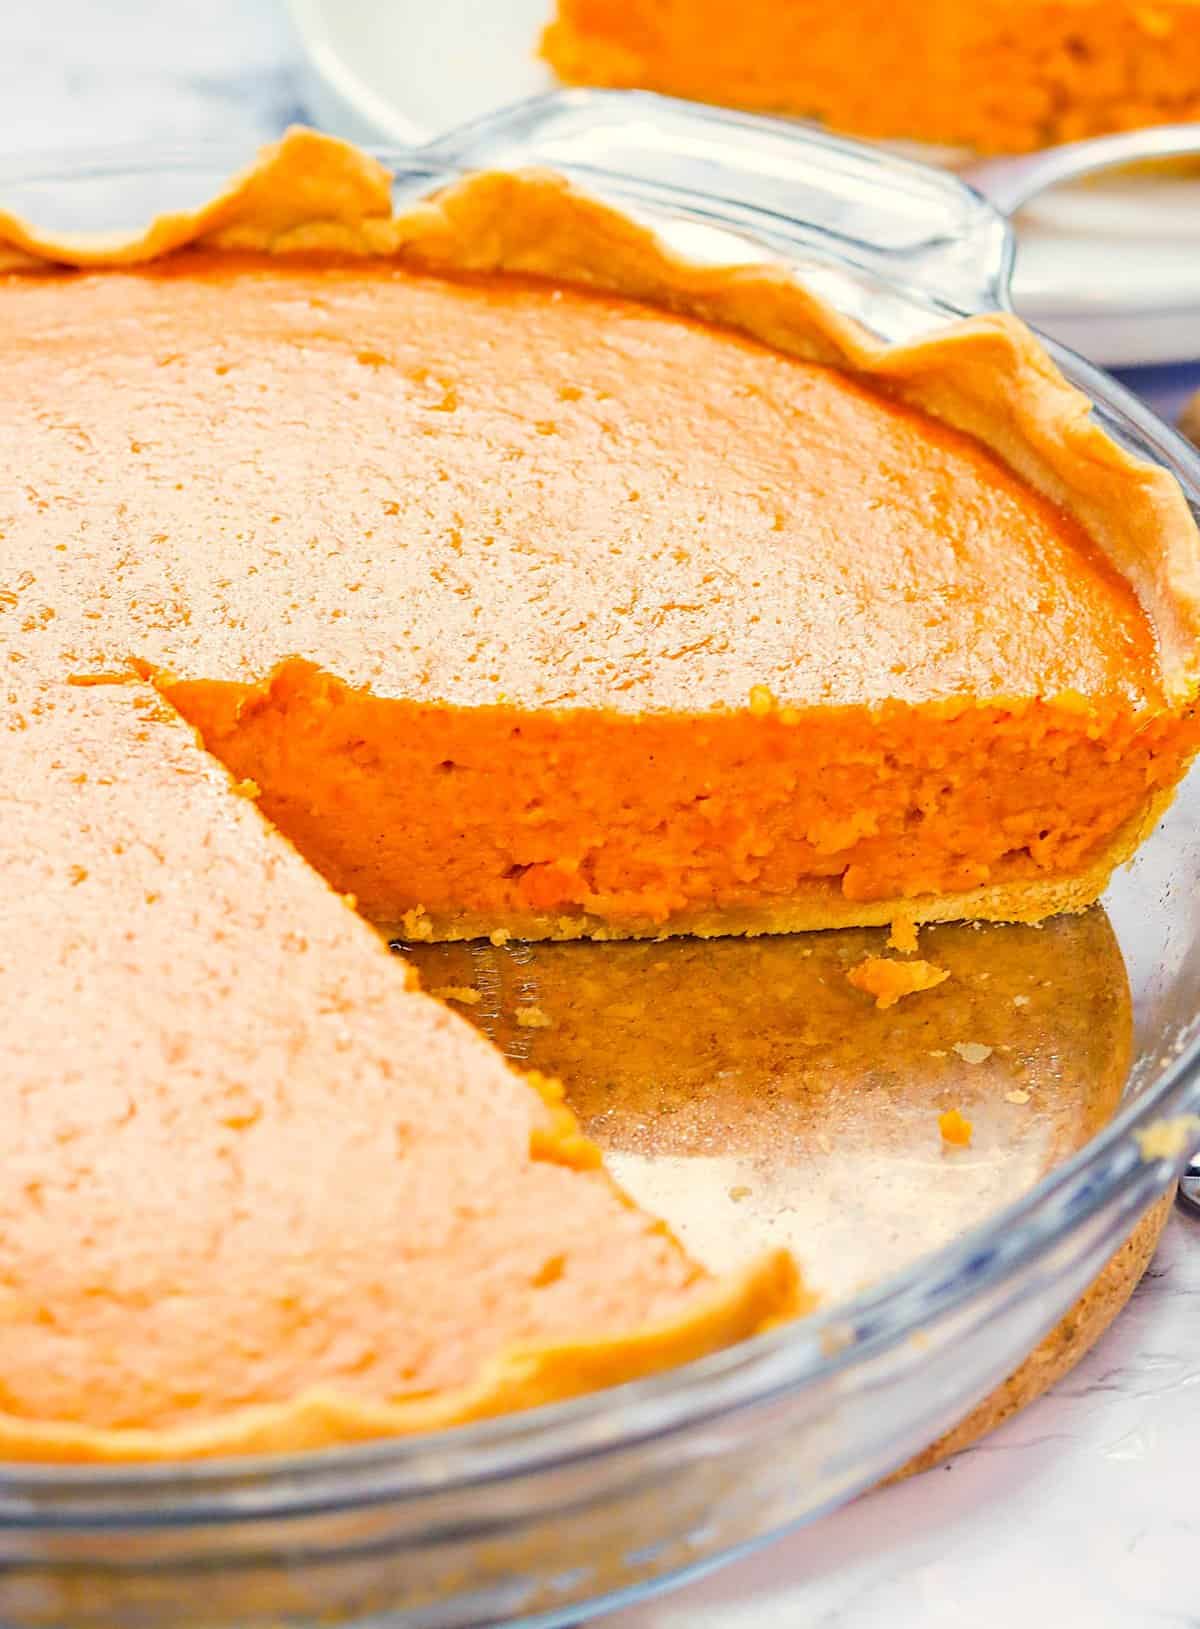 A freshly made Condensed Milk Sweet Potato Pie sliced and ready to serve